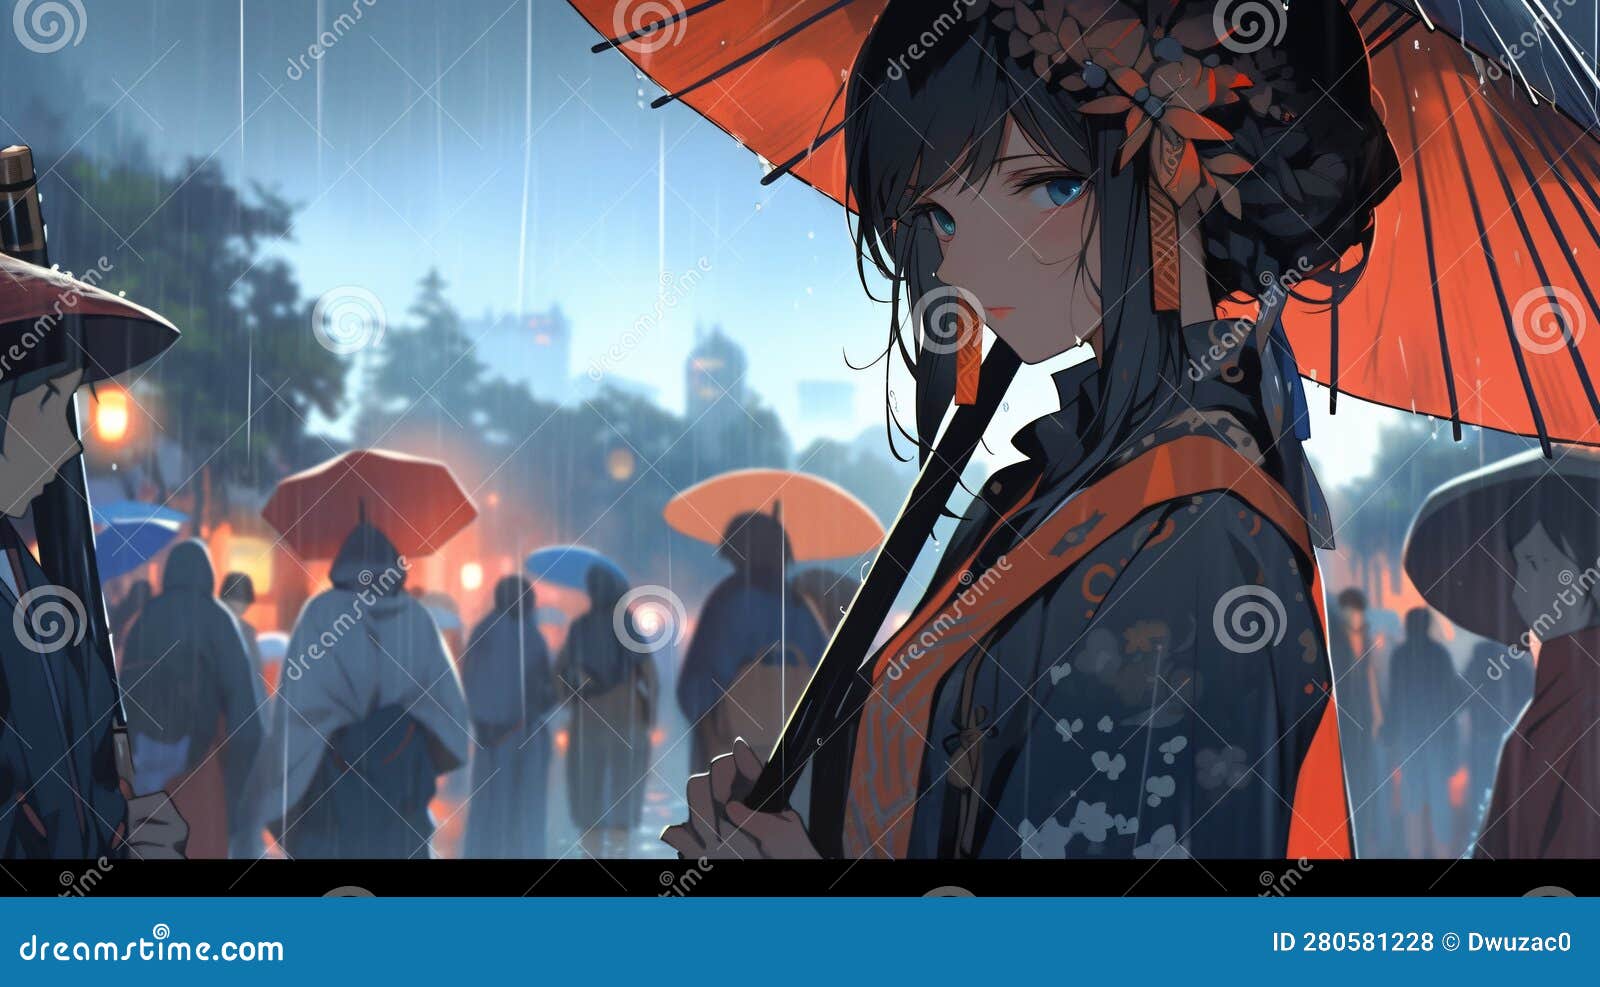 Rainy Street Alleyway Style Anime Animation Stock Footage Video (100%  Royalty-free) 1105736103 | Shutterstock